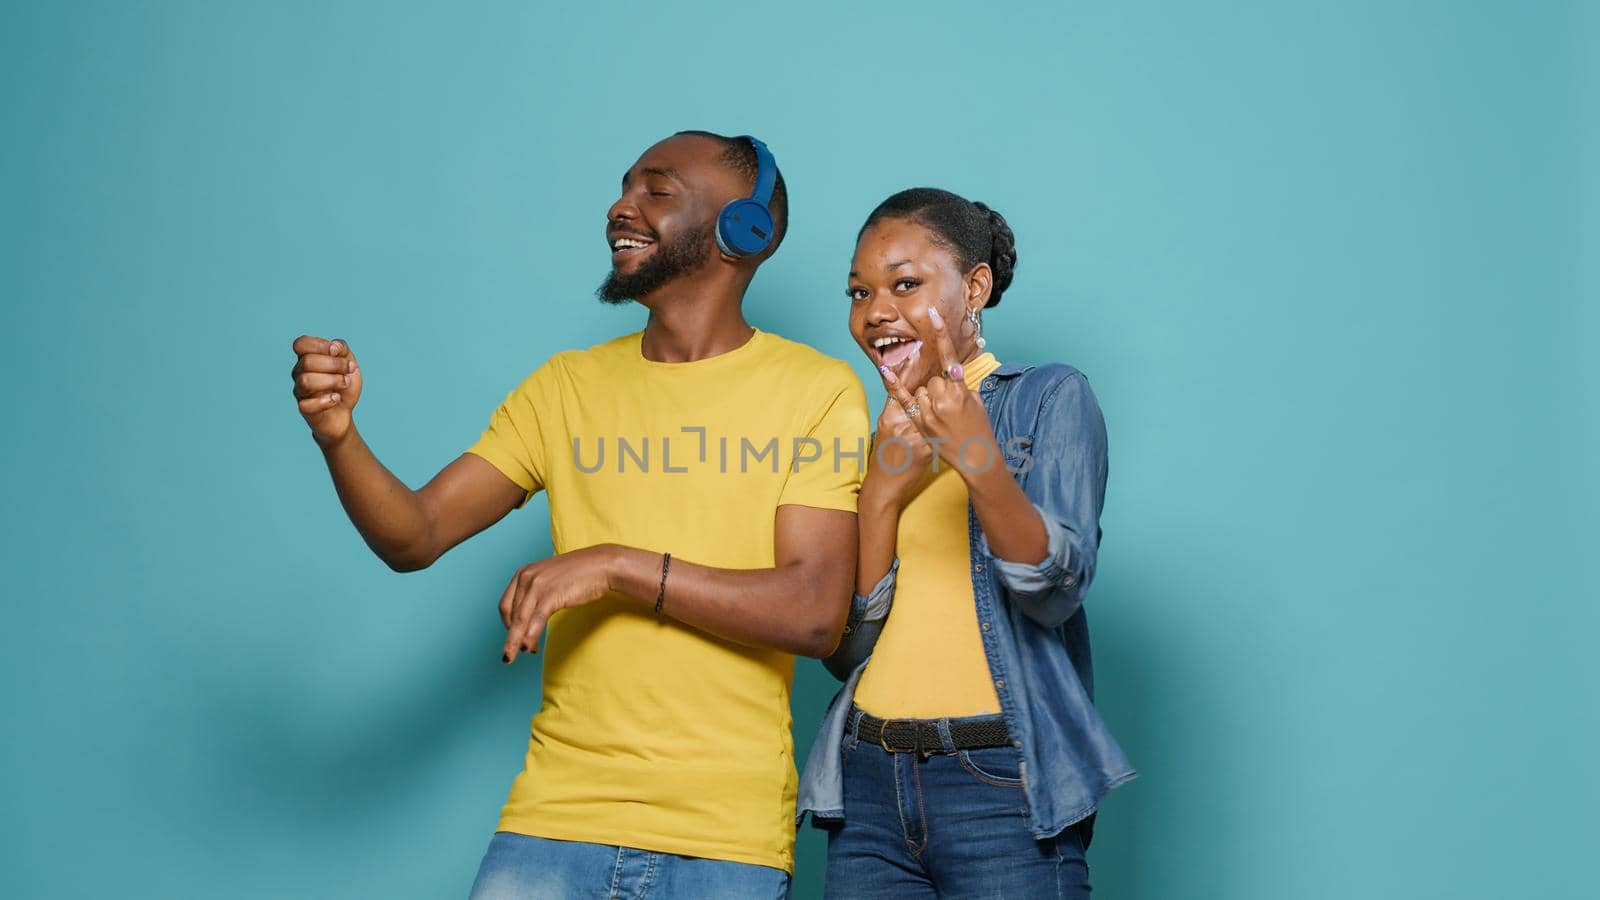 Man with headphones playing air guitar and woman showing rock sign, couple having fun together with music. Cheerful people enjoying sound and holding rhythm for entertainment.